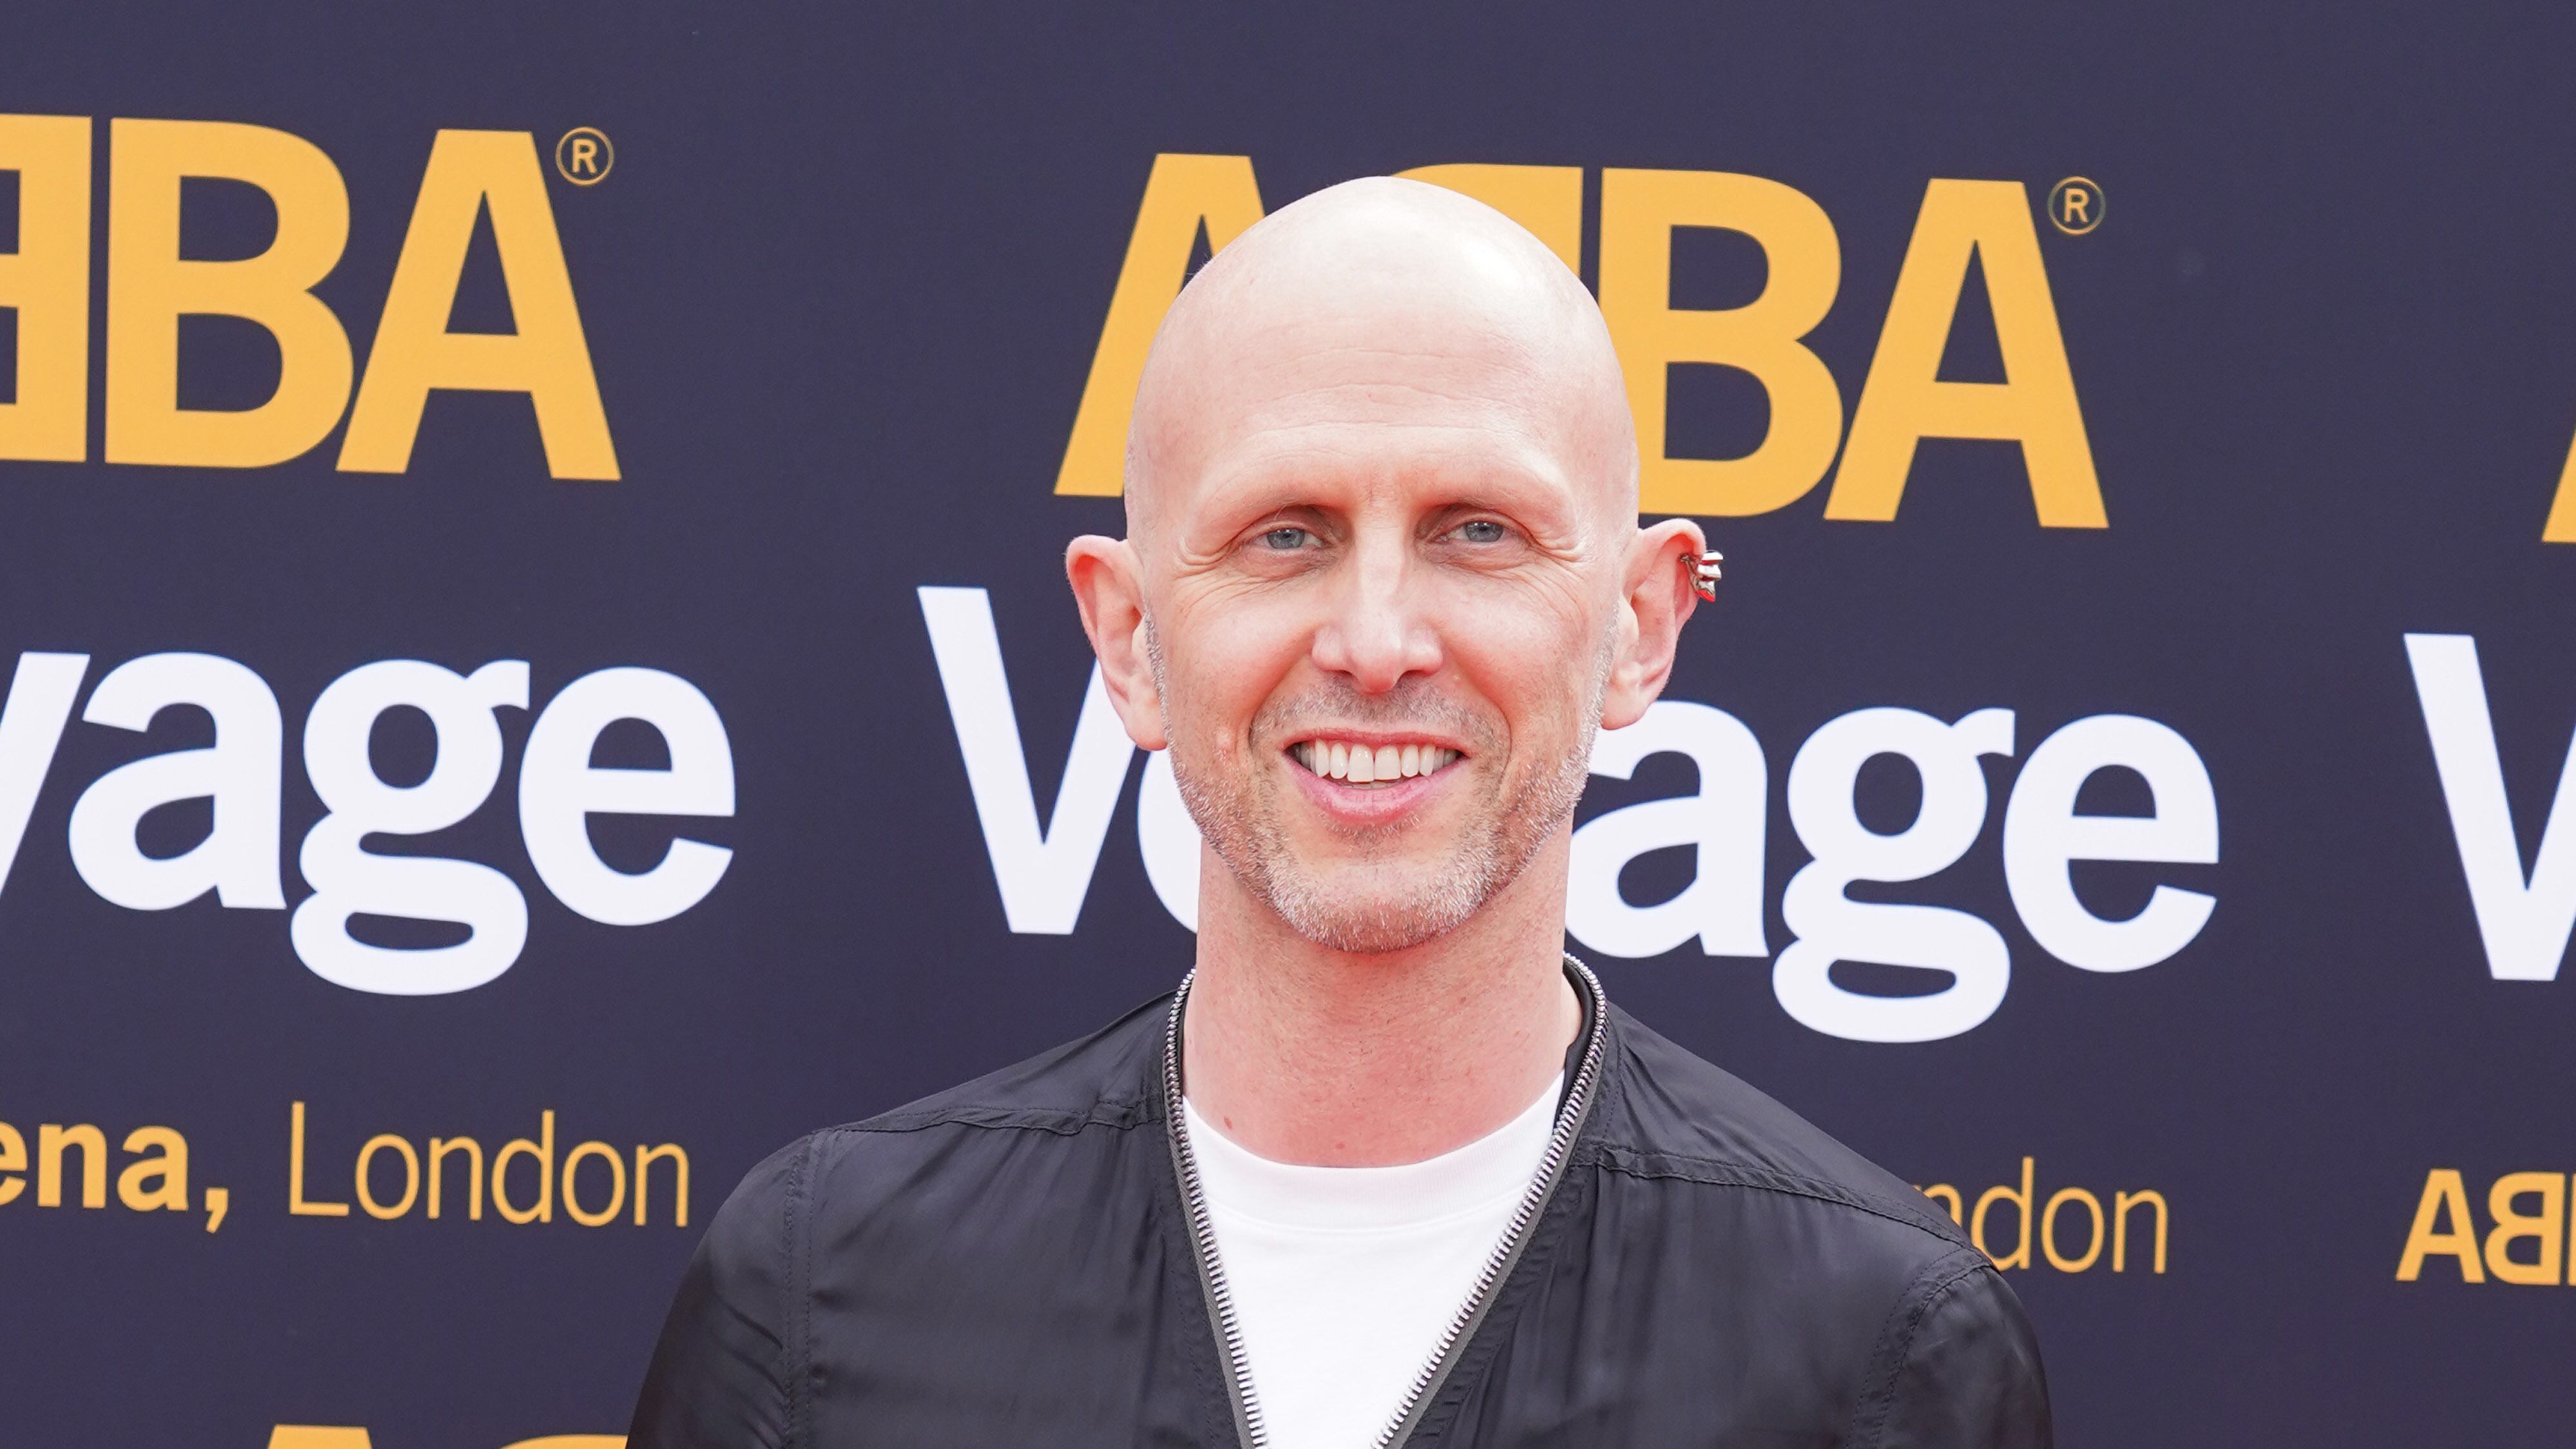 Wayne McGregor said he was delighted with his knighthood